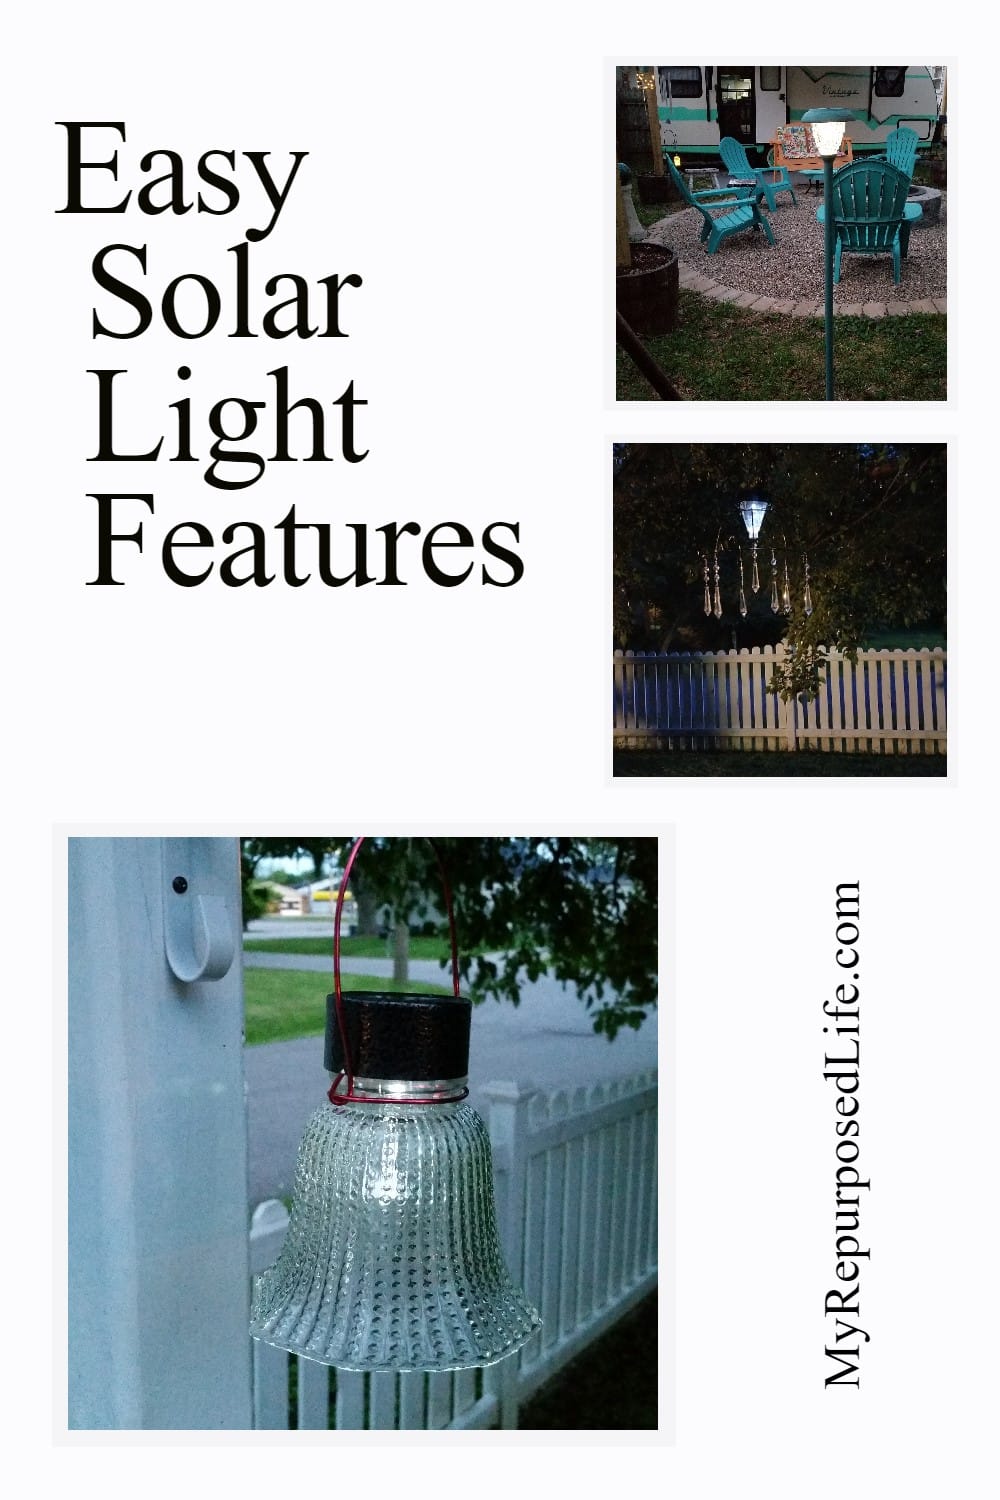 A collection of solar light features including upcycled lamps, chandeliers and more. Easy afternoon projects to light up your outdoor space. via @repurposedlife